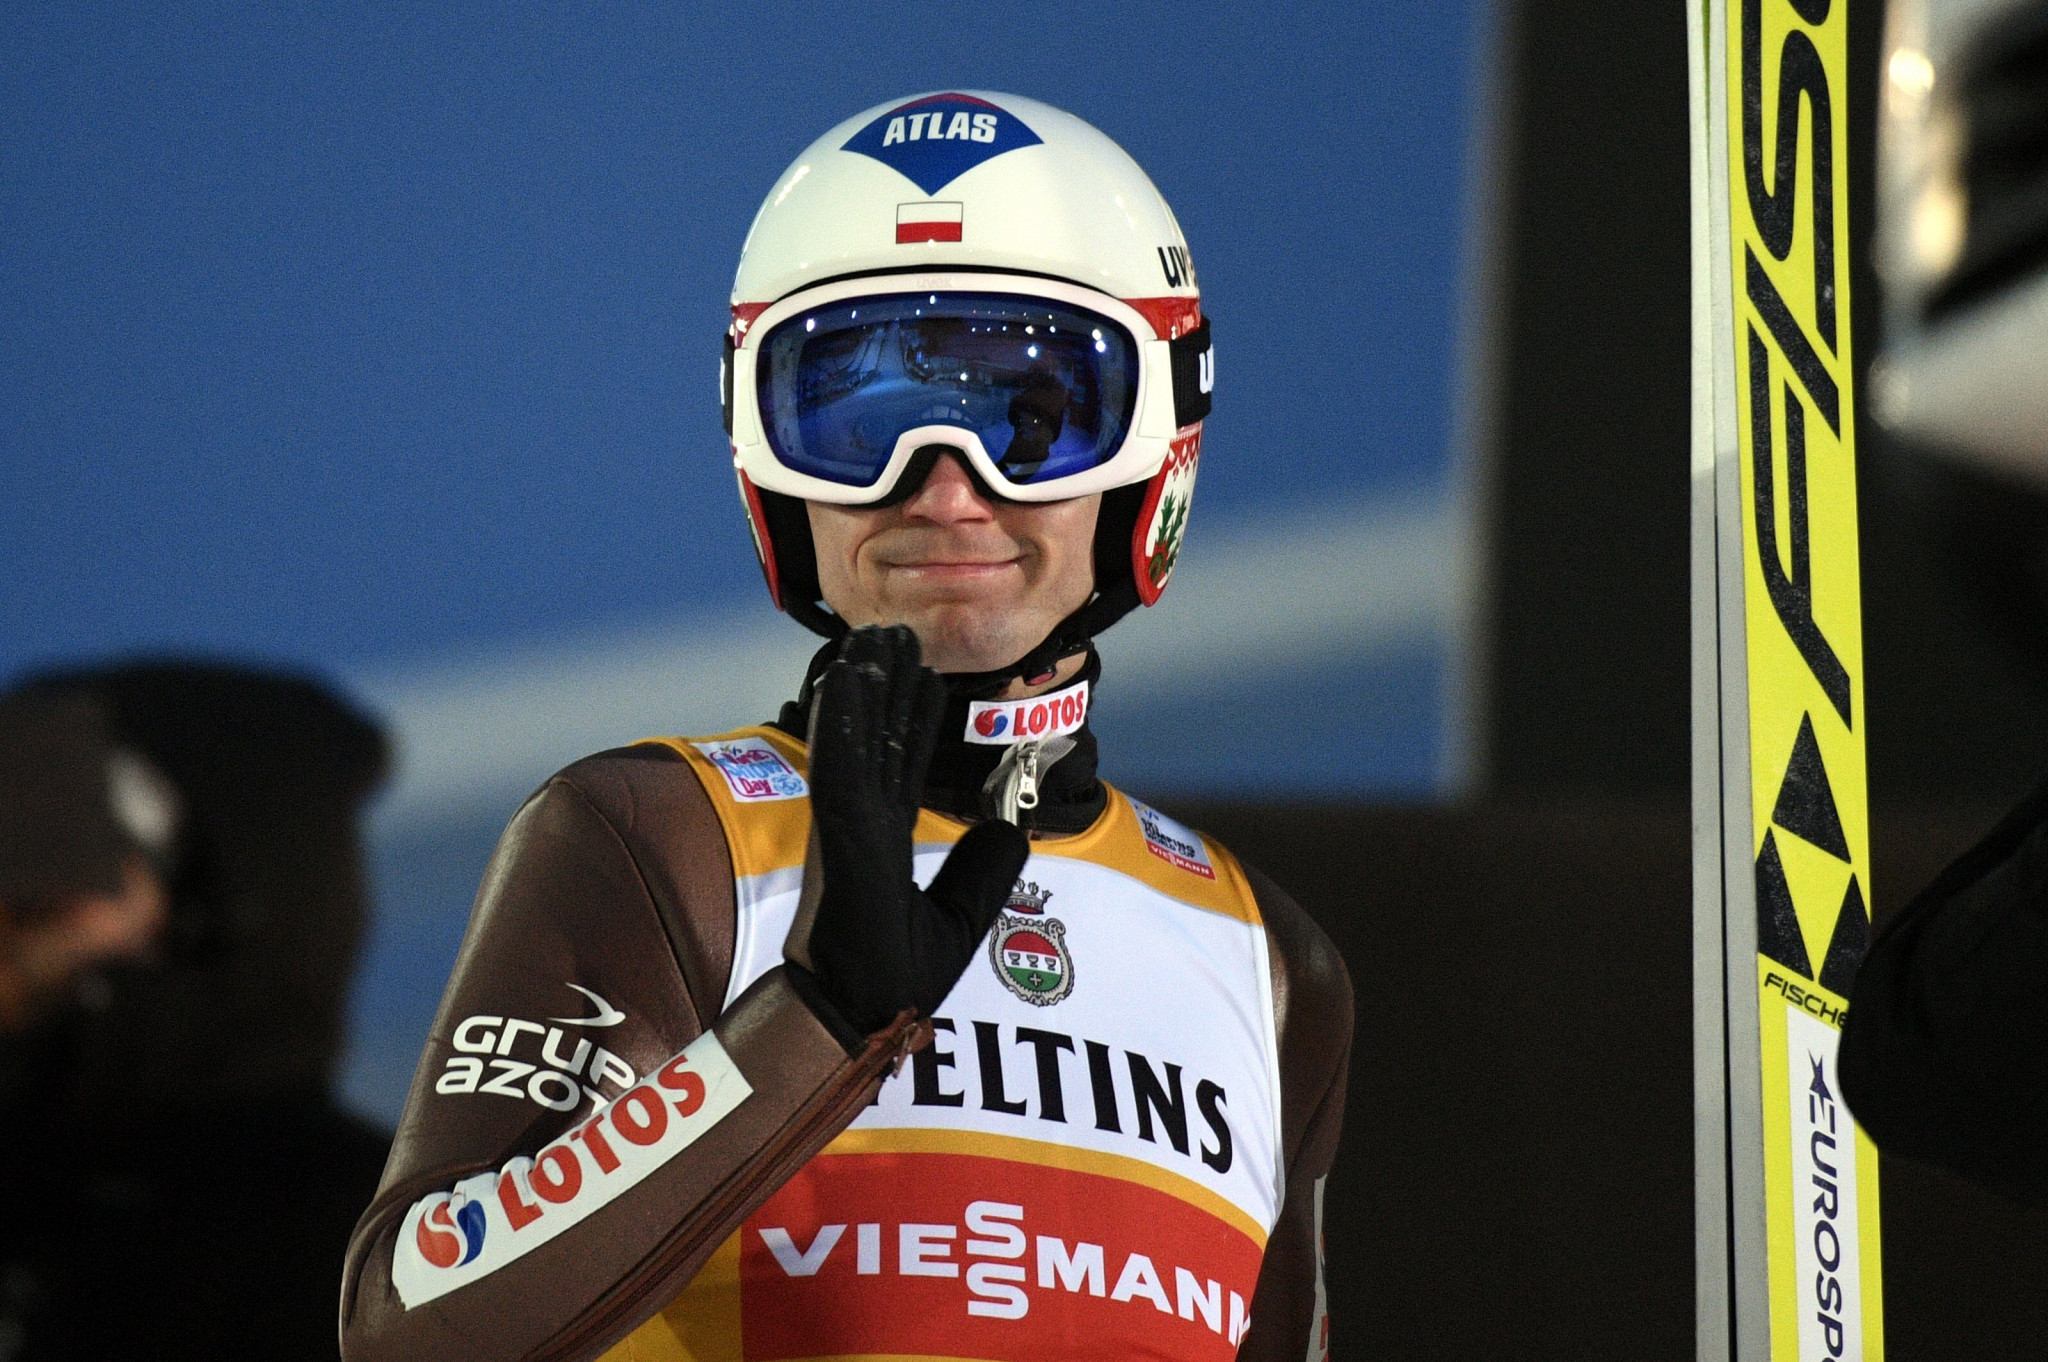 Stoch leads qualifying for FIS Ski Jumping World Cup in Oslo